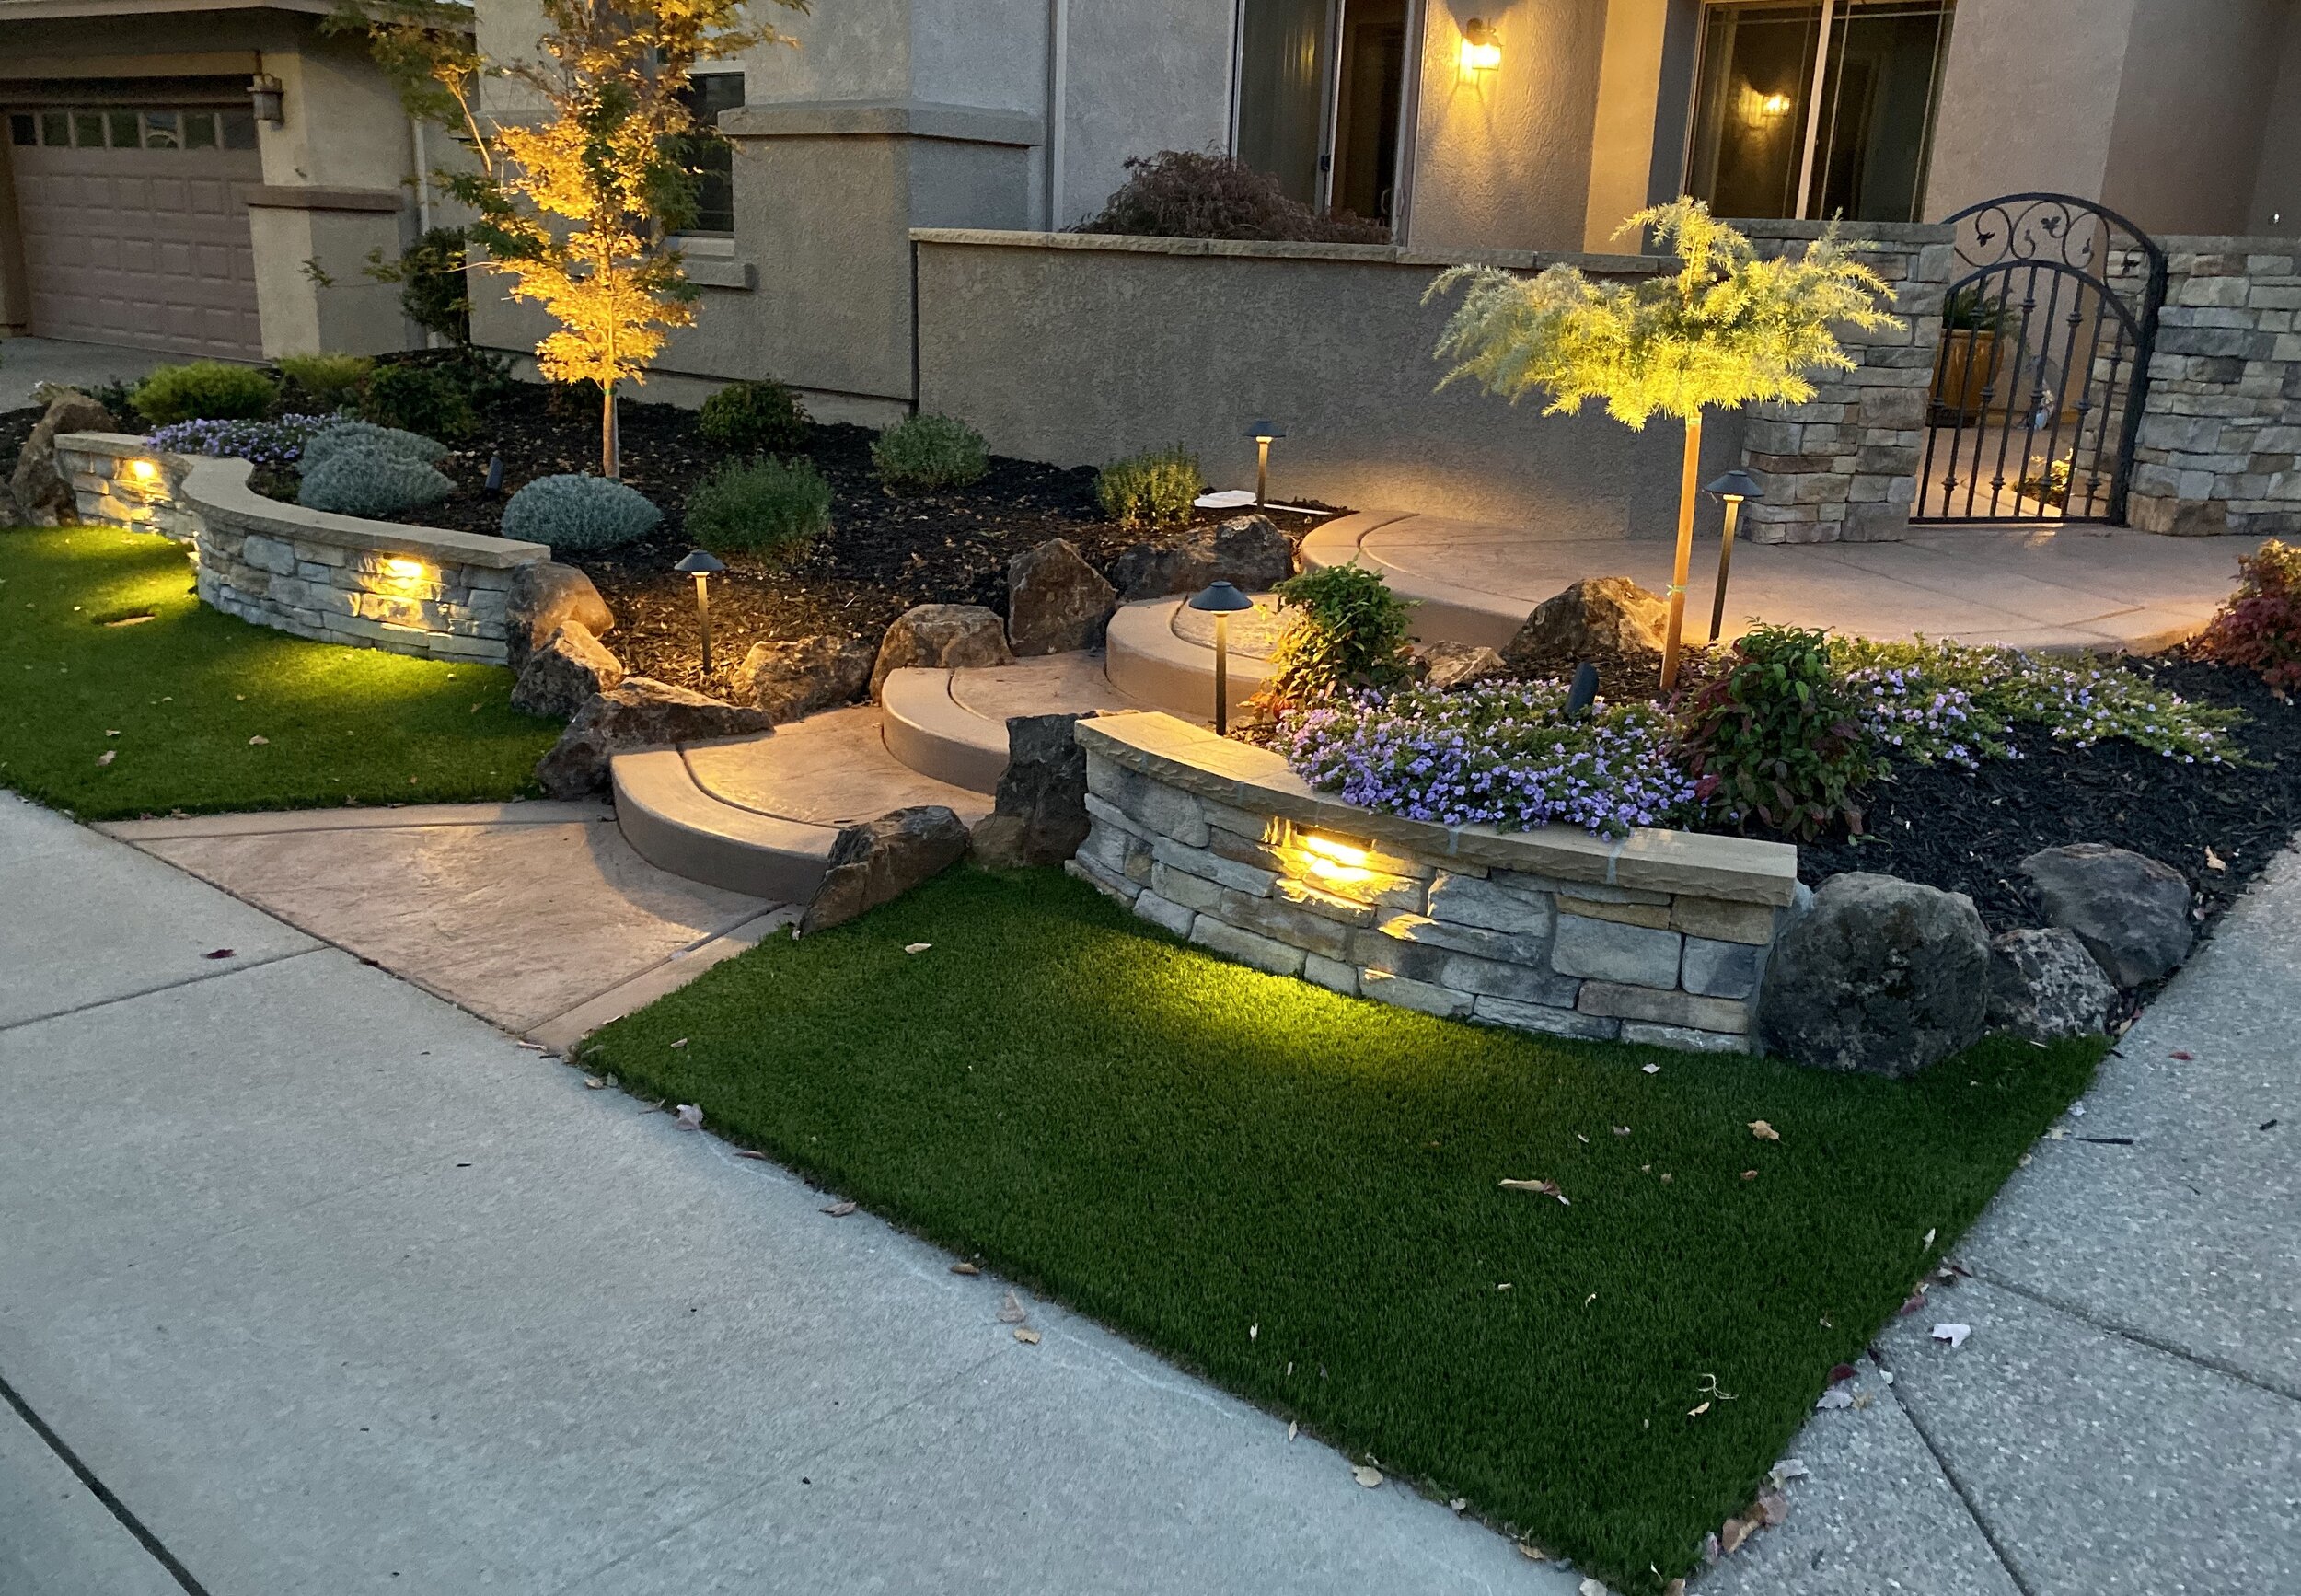 Gallery Terrain Creations Landscape, How To Start A Landscaping Business In Pa